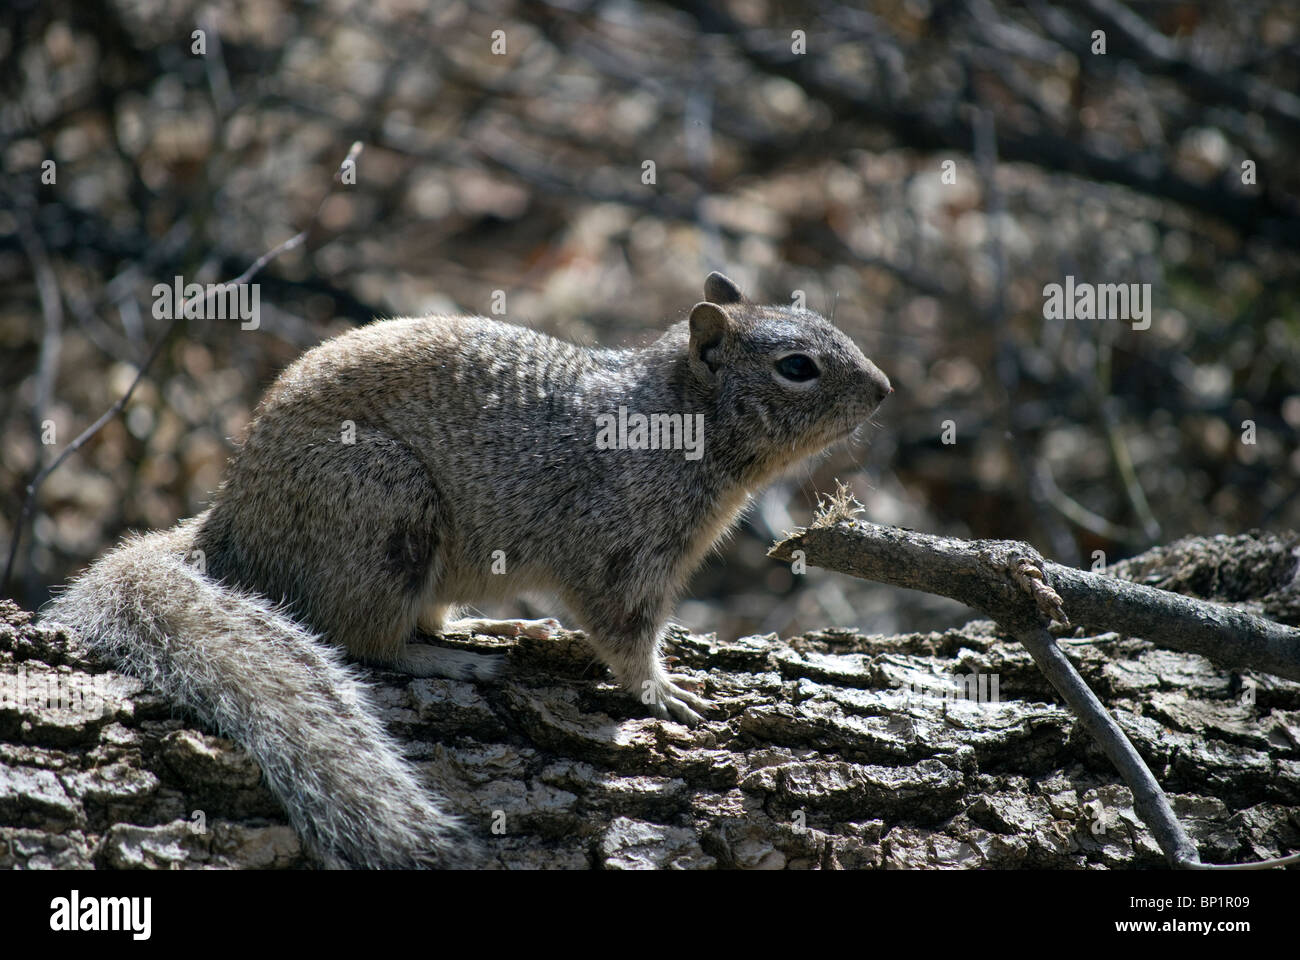 A rock squirrel (Spermophilus variegatus) sitting on the trunk of a fallen Narrowleaf Cottonwood (Populus angustifolia) tree. Stock Photo